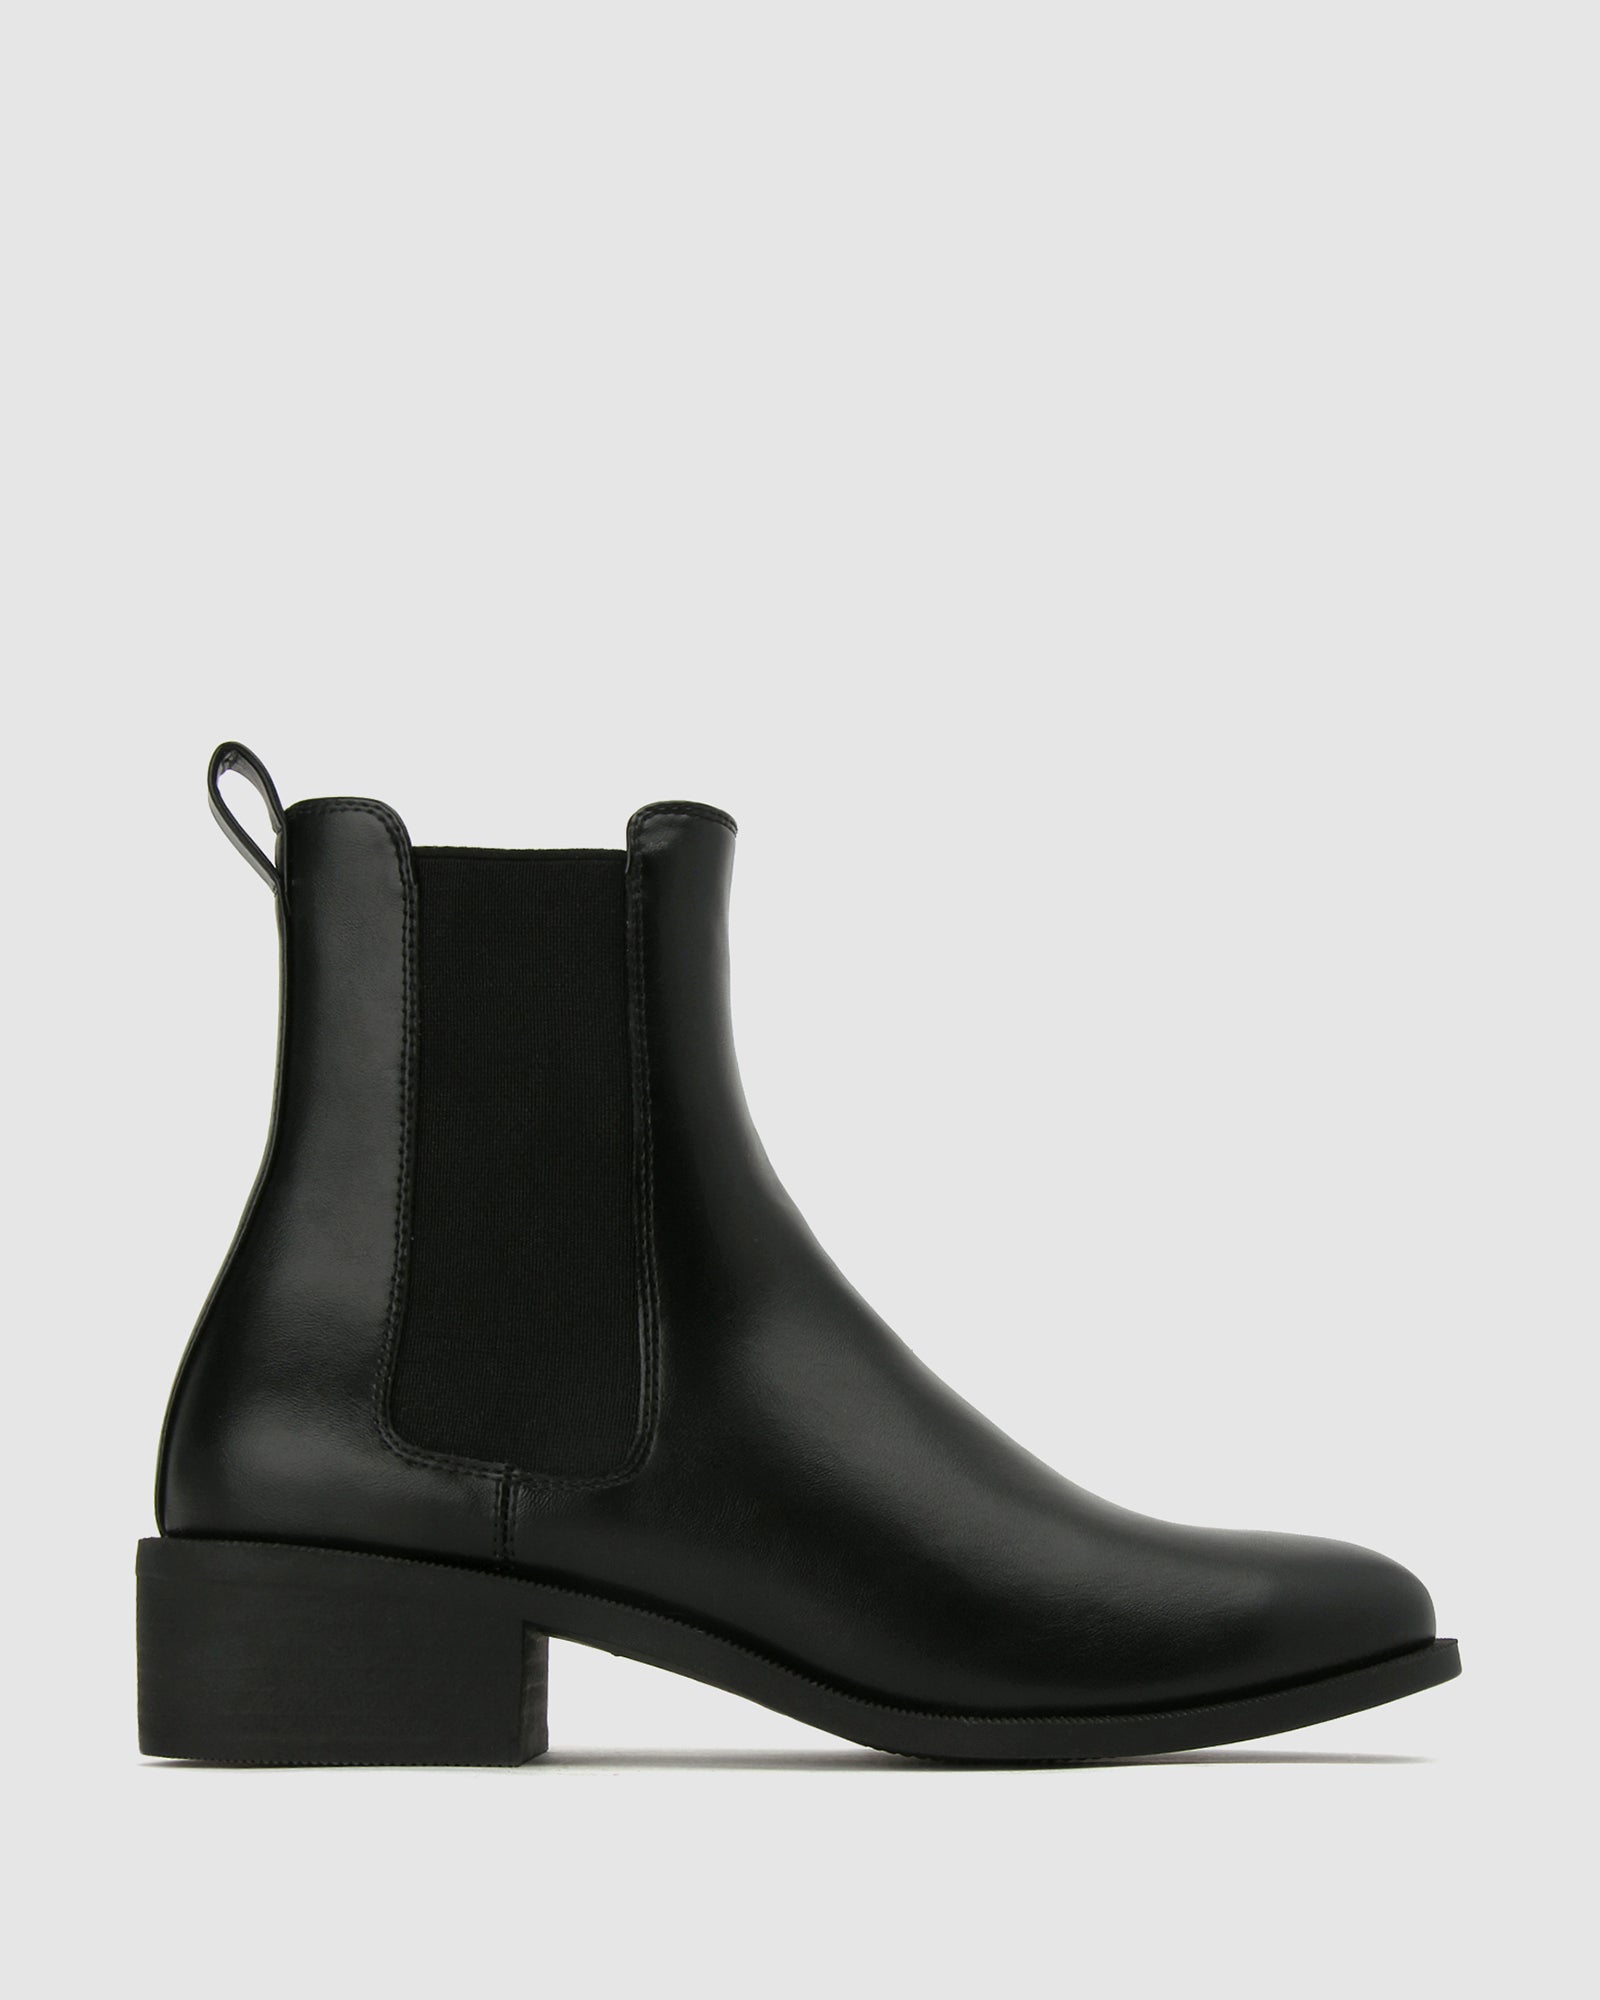 Buy DINGO Round Toe Ankle Boots by Zeroe online - Betts